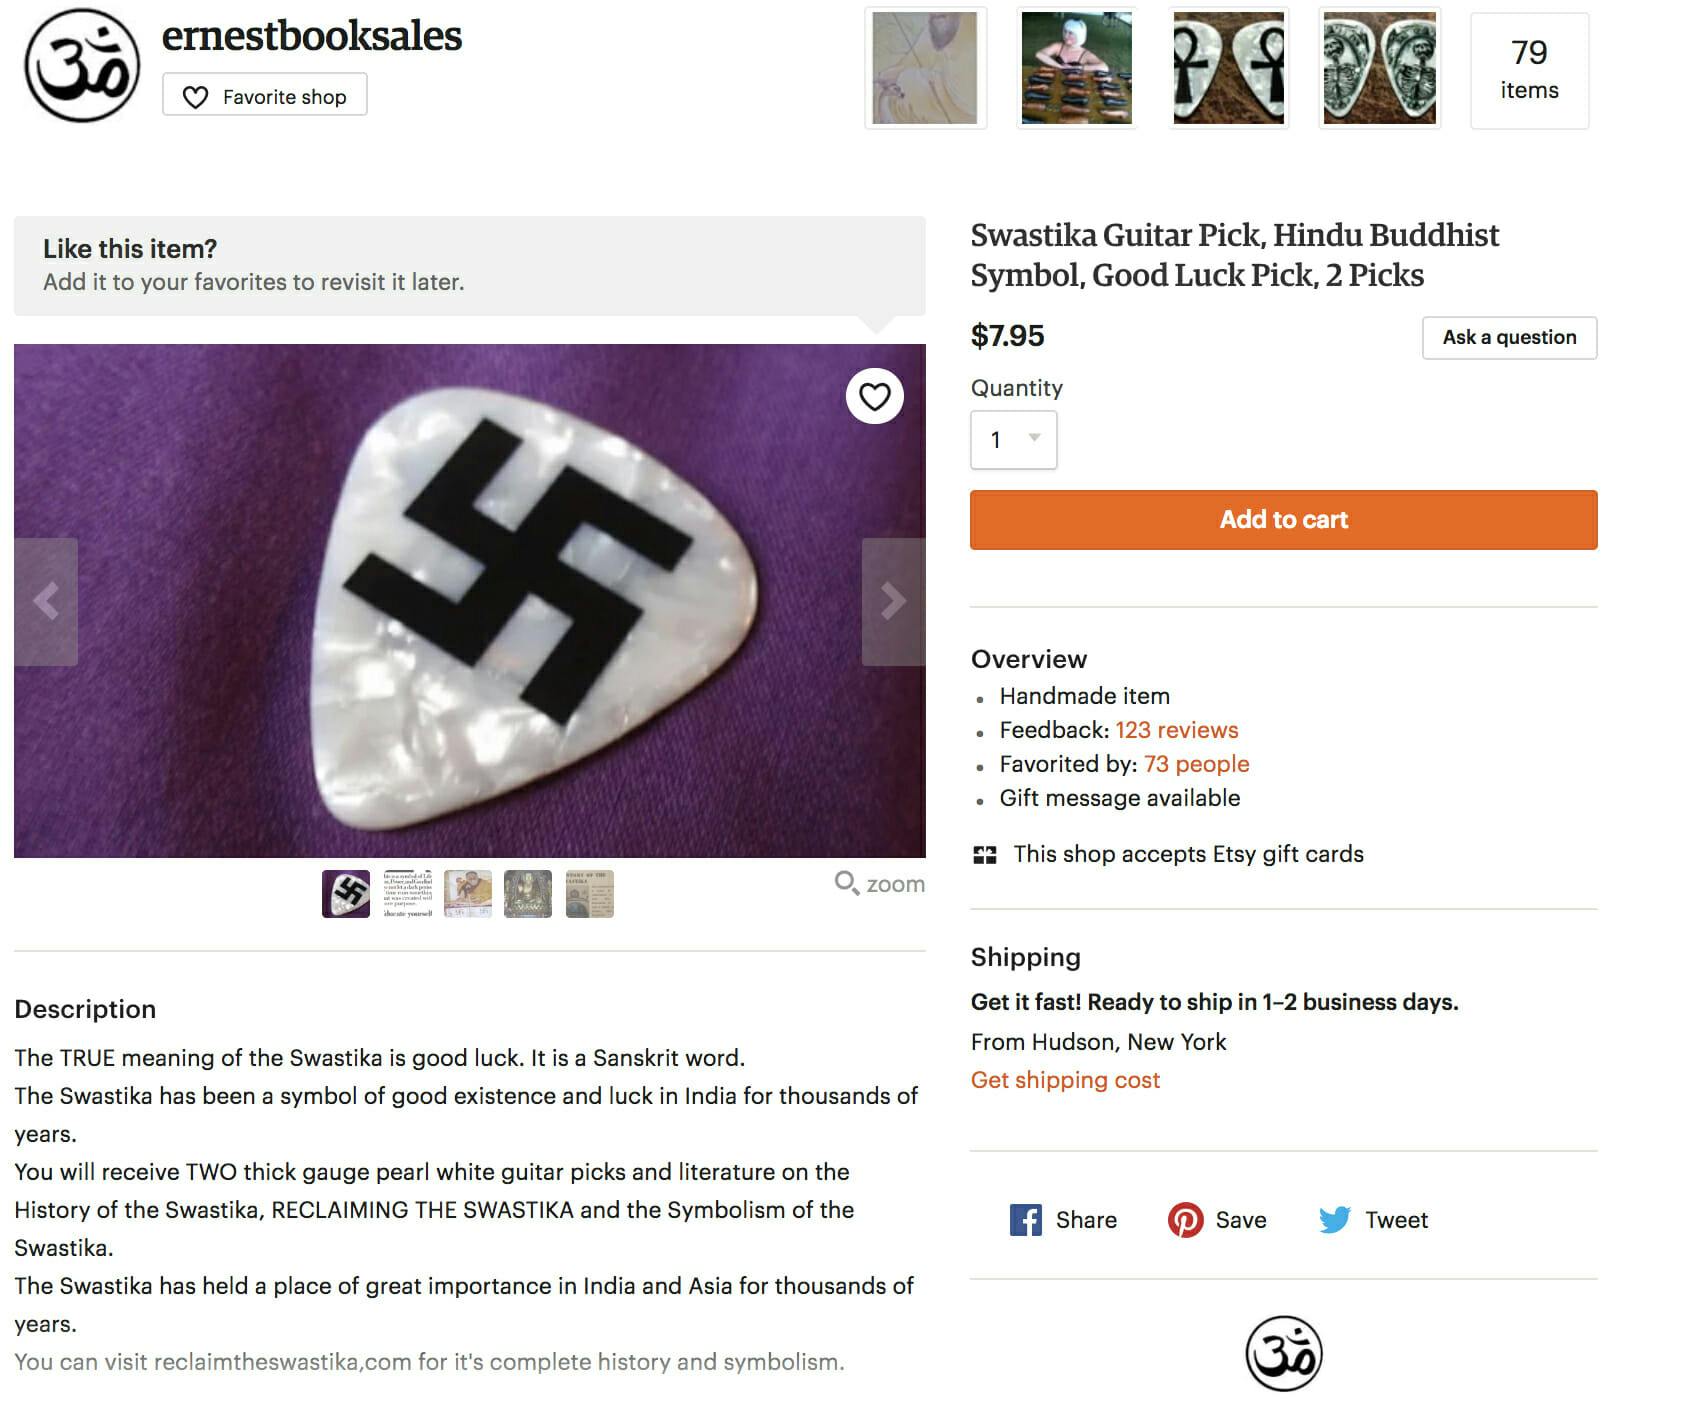 Items marked with swastikas are listed for sale on Etsy.